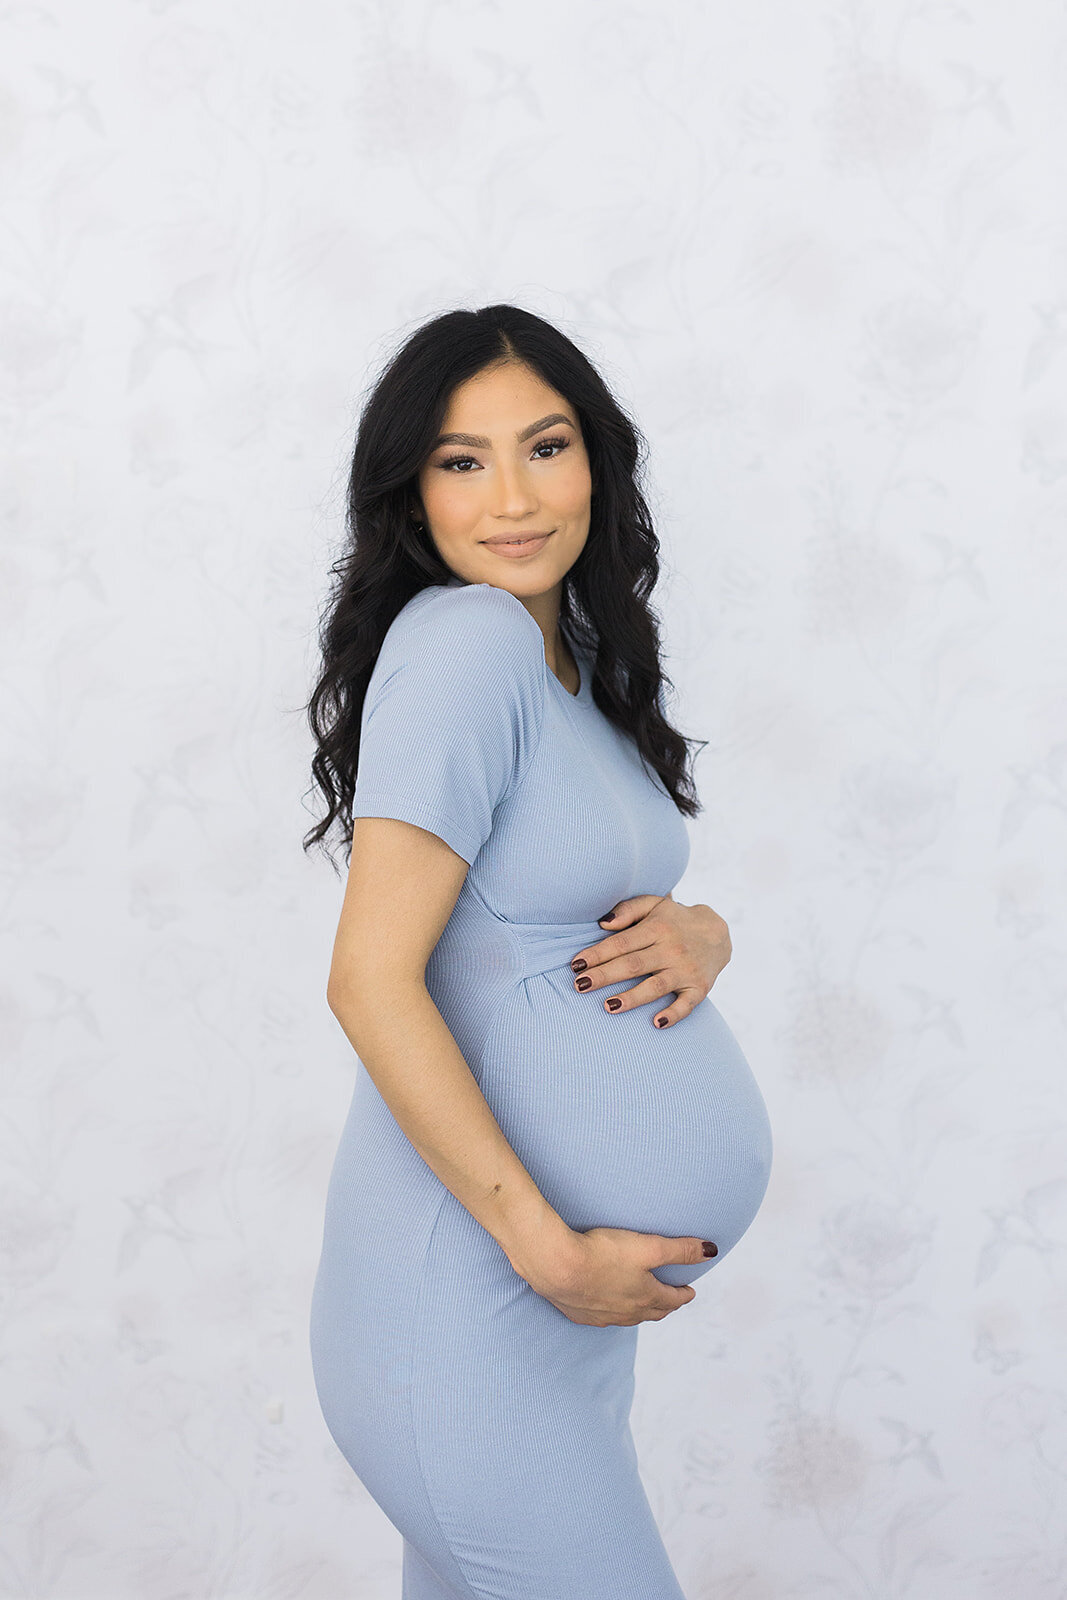 Maternity session in a studio with mom wearing a blue dress and holding her belly